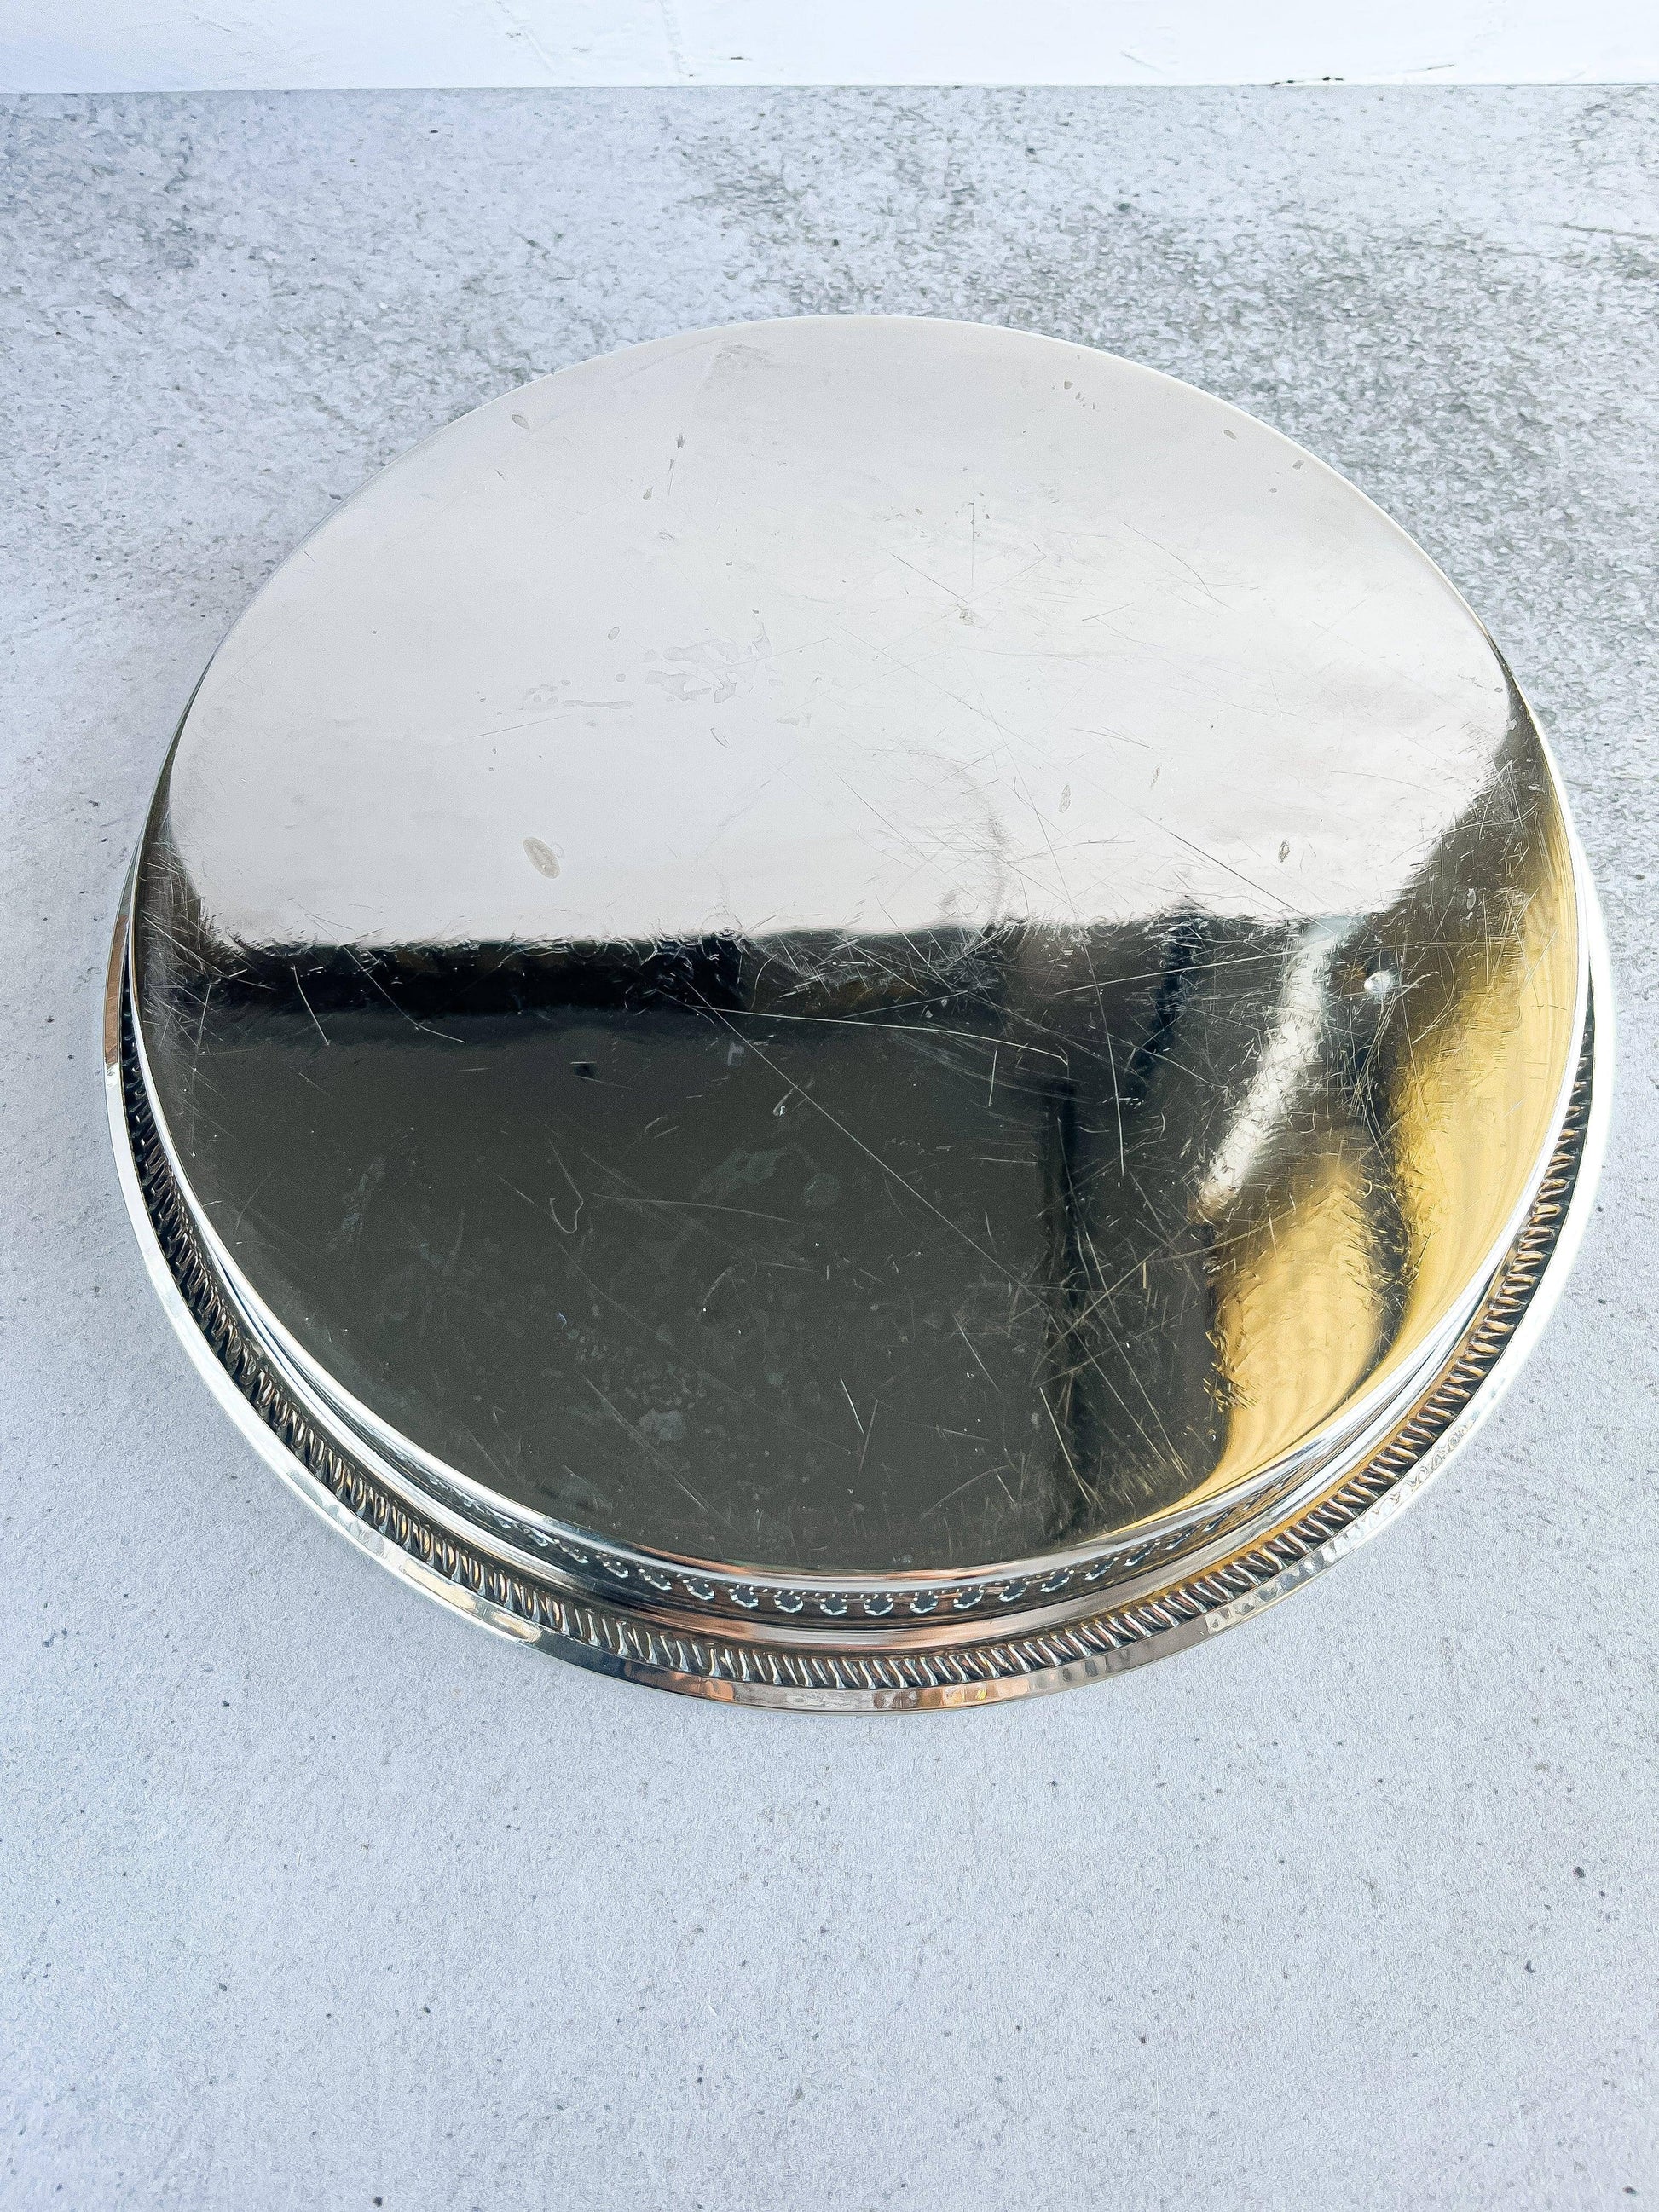 Silver-Plated Round Gallery Tray with Floral Etching - SOSC Home